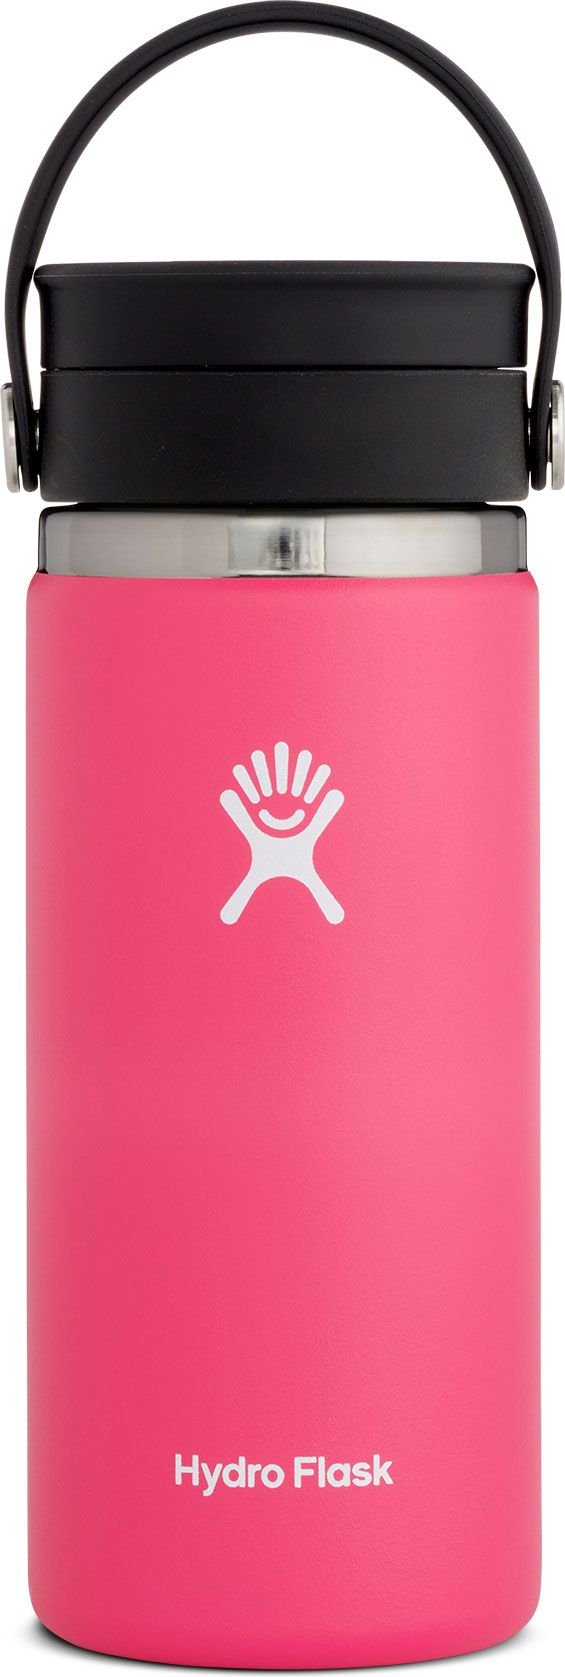 Hydro Flask Accessories 16oz Wide Mouth Flexible Sip Watermelon